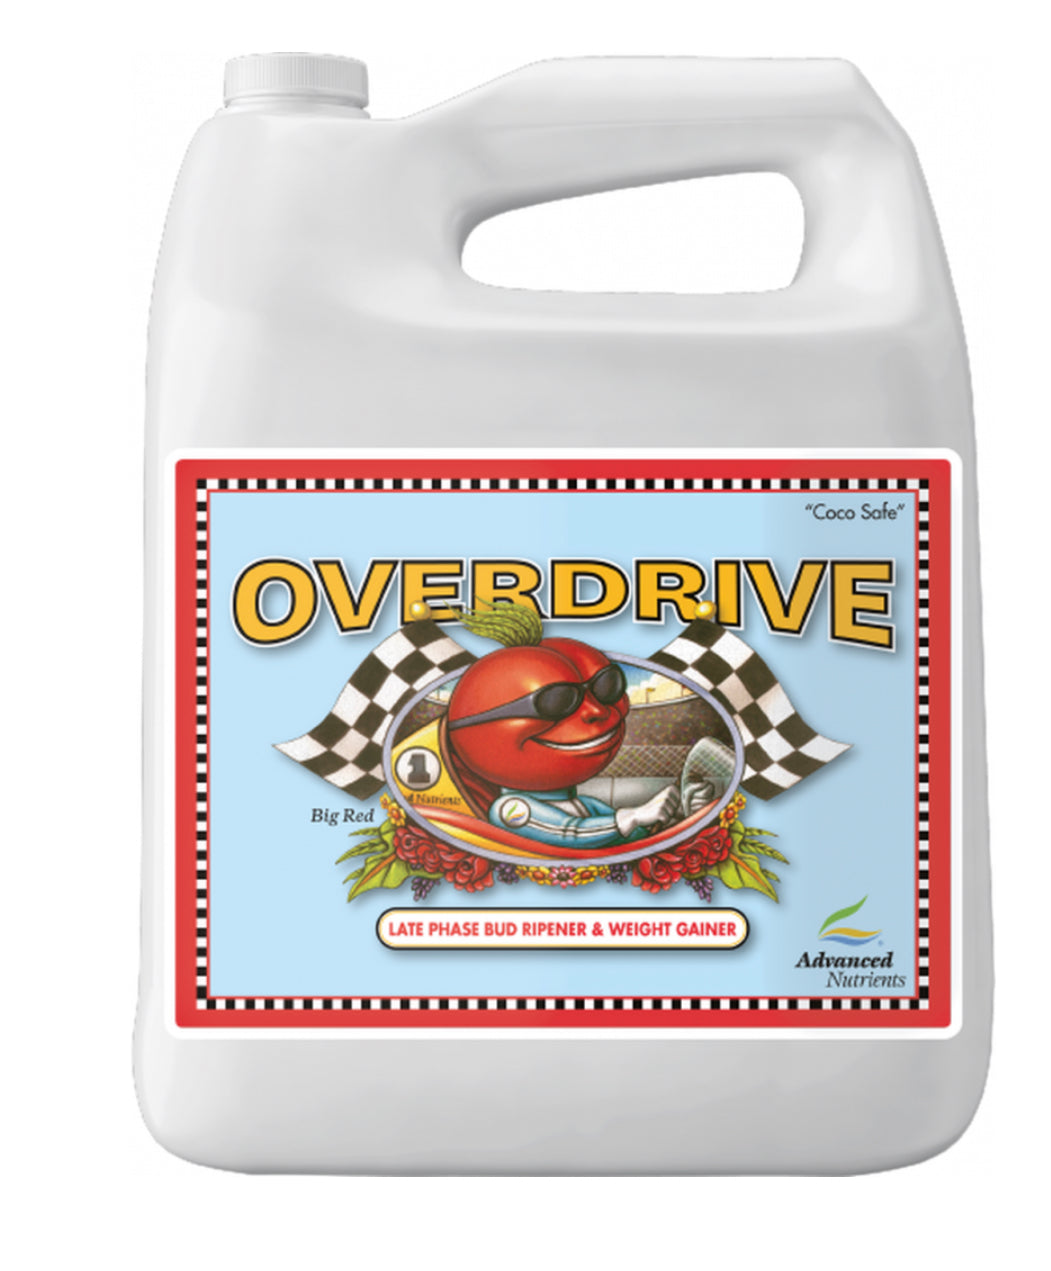 Advanced Overdrive Big Red Coco Safe